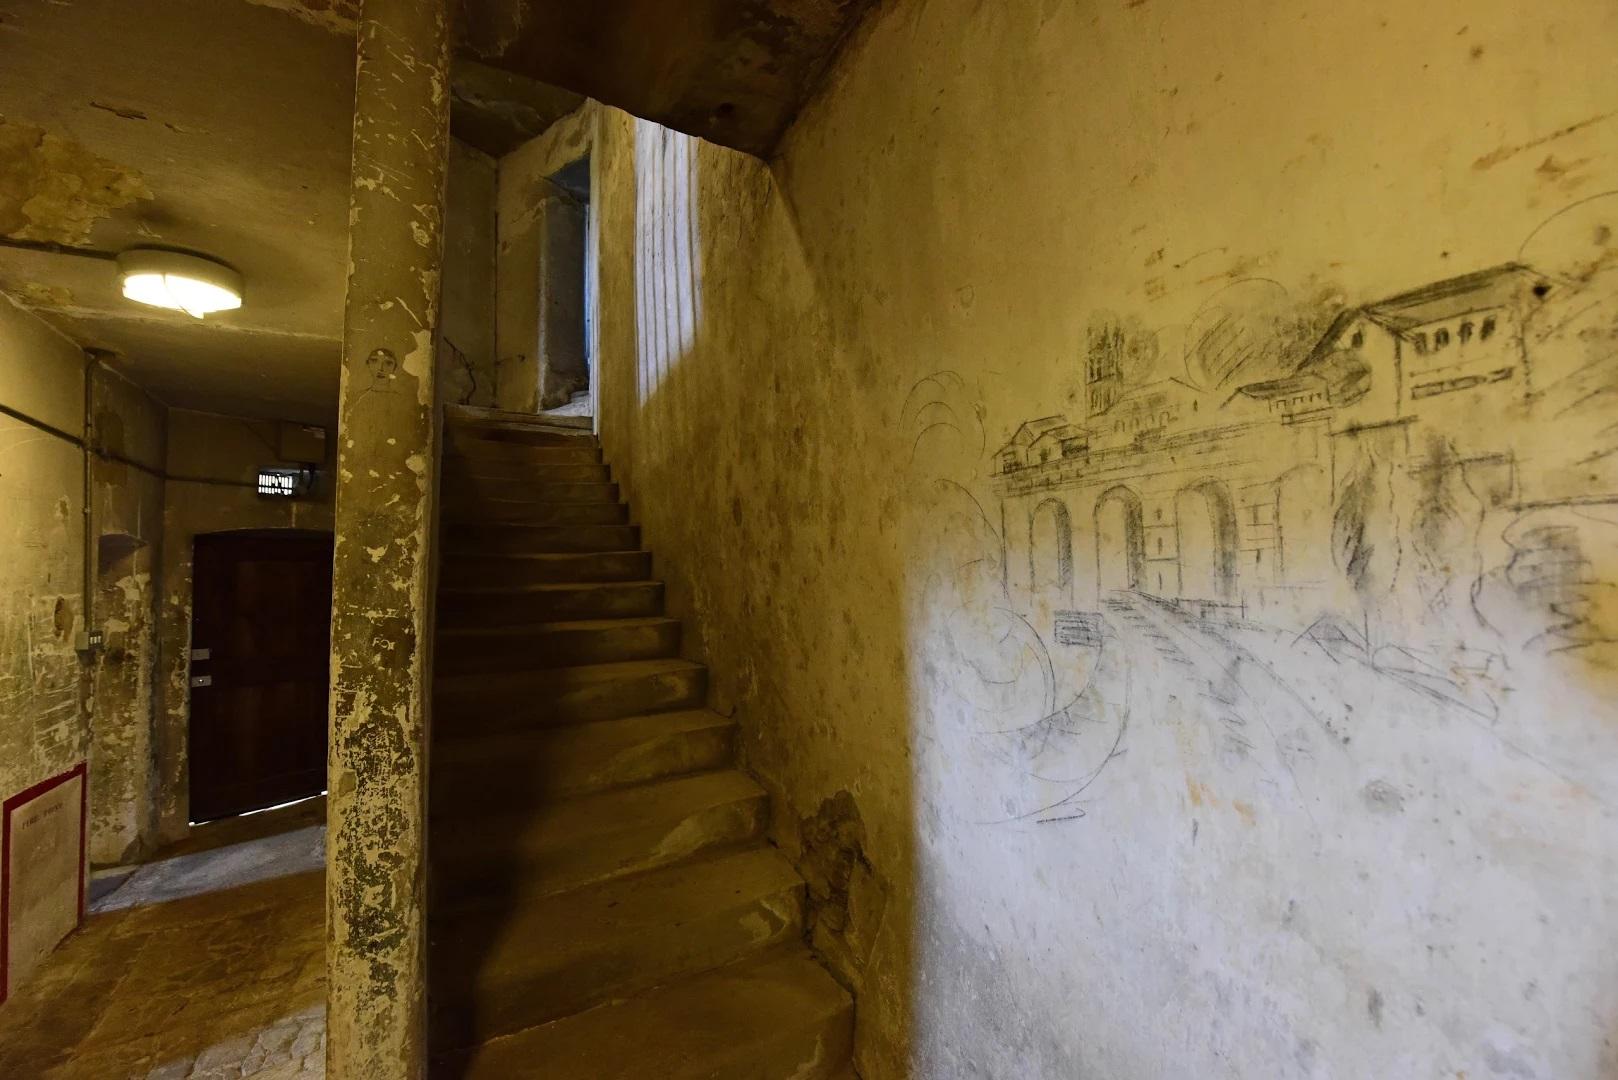 The cells of Richmond Castle, which have over 5,000 drawings on them, will now be preserved by English Heritage.